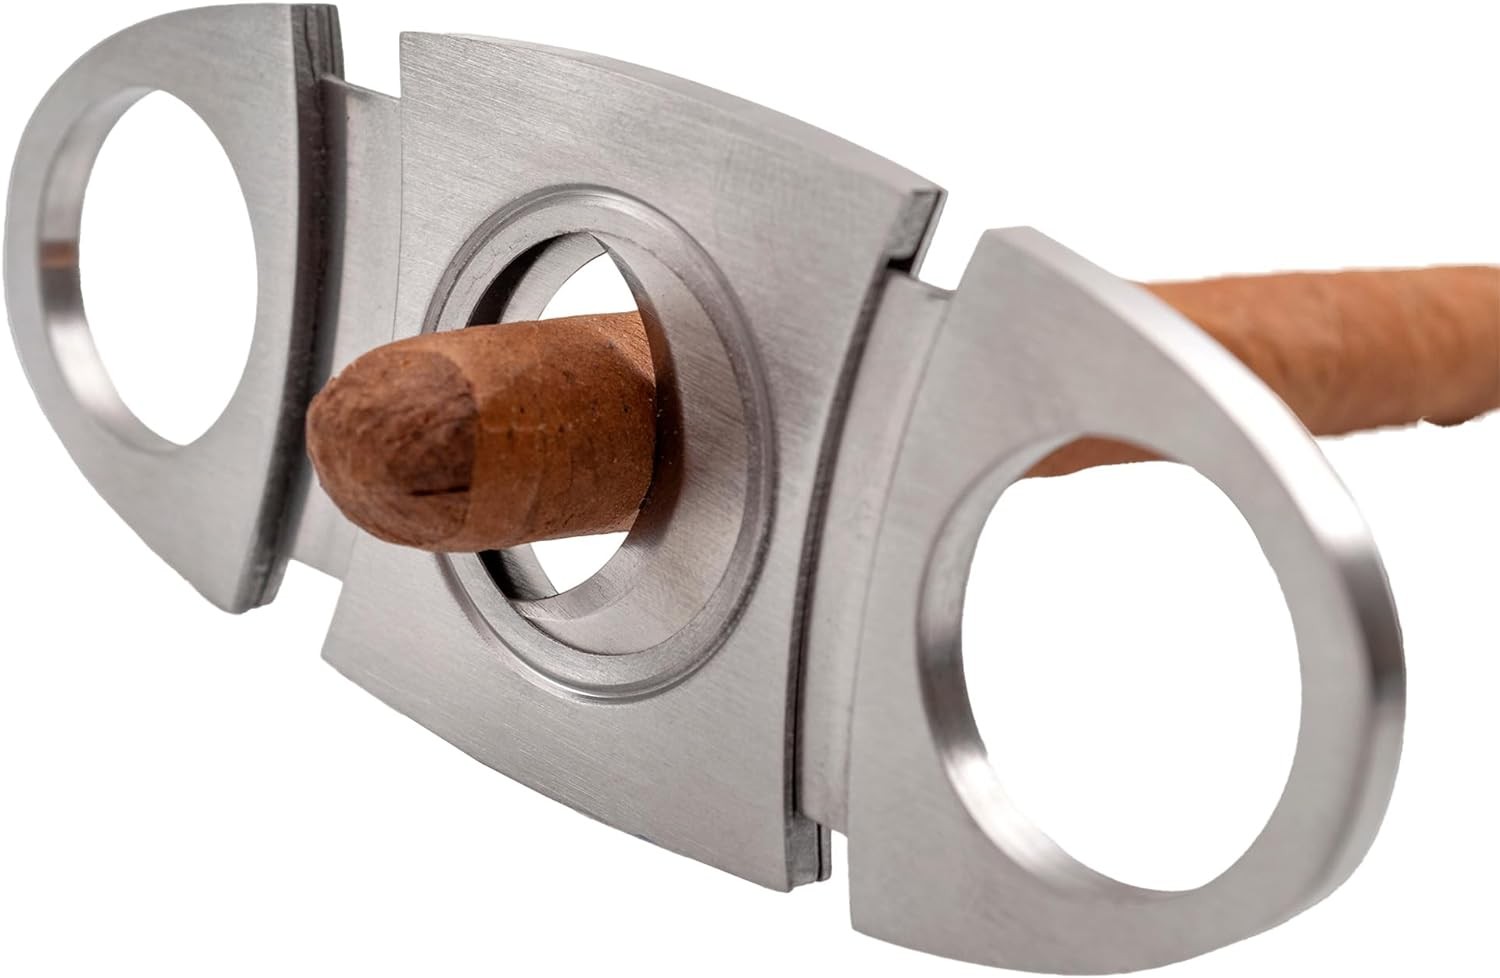 Durable and Stylish Nylea Cigar Cutter